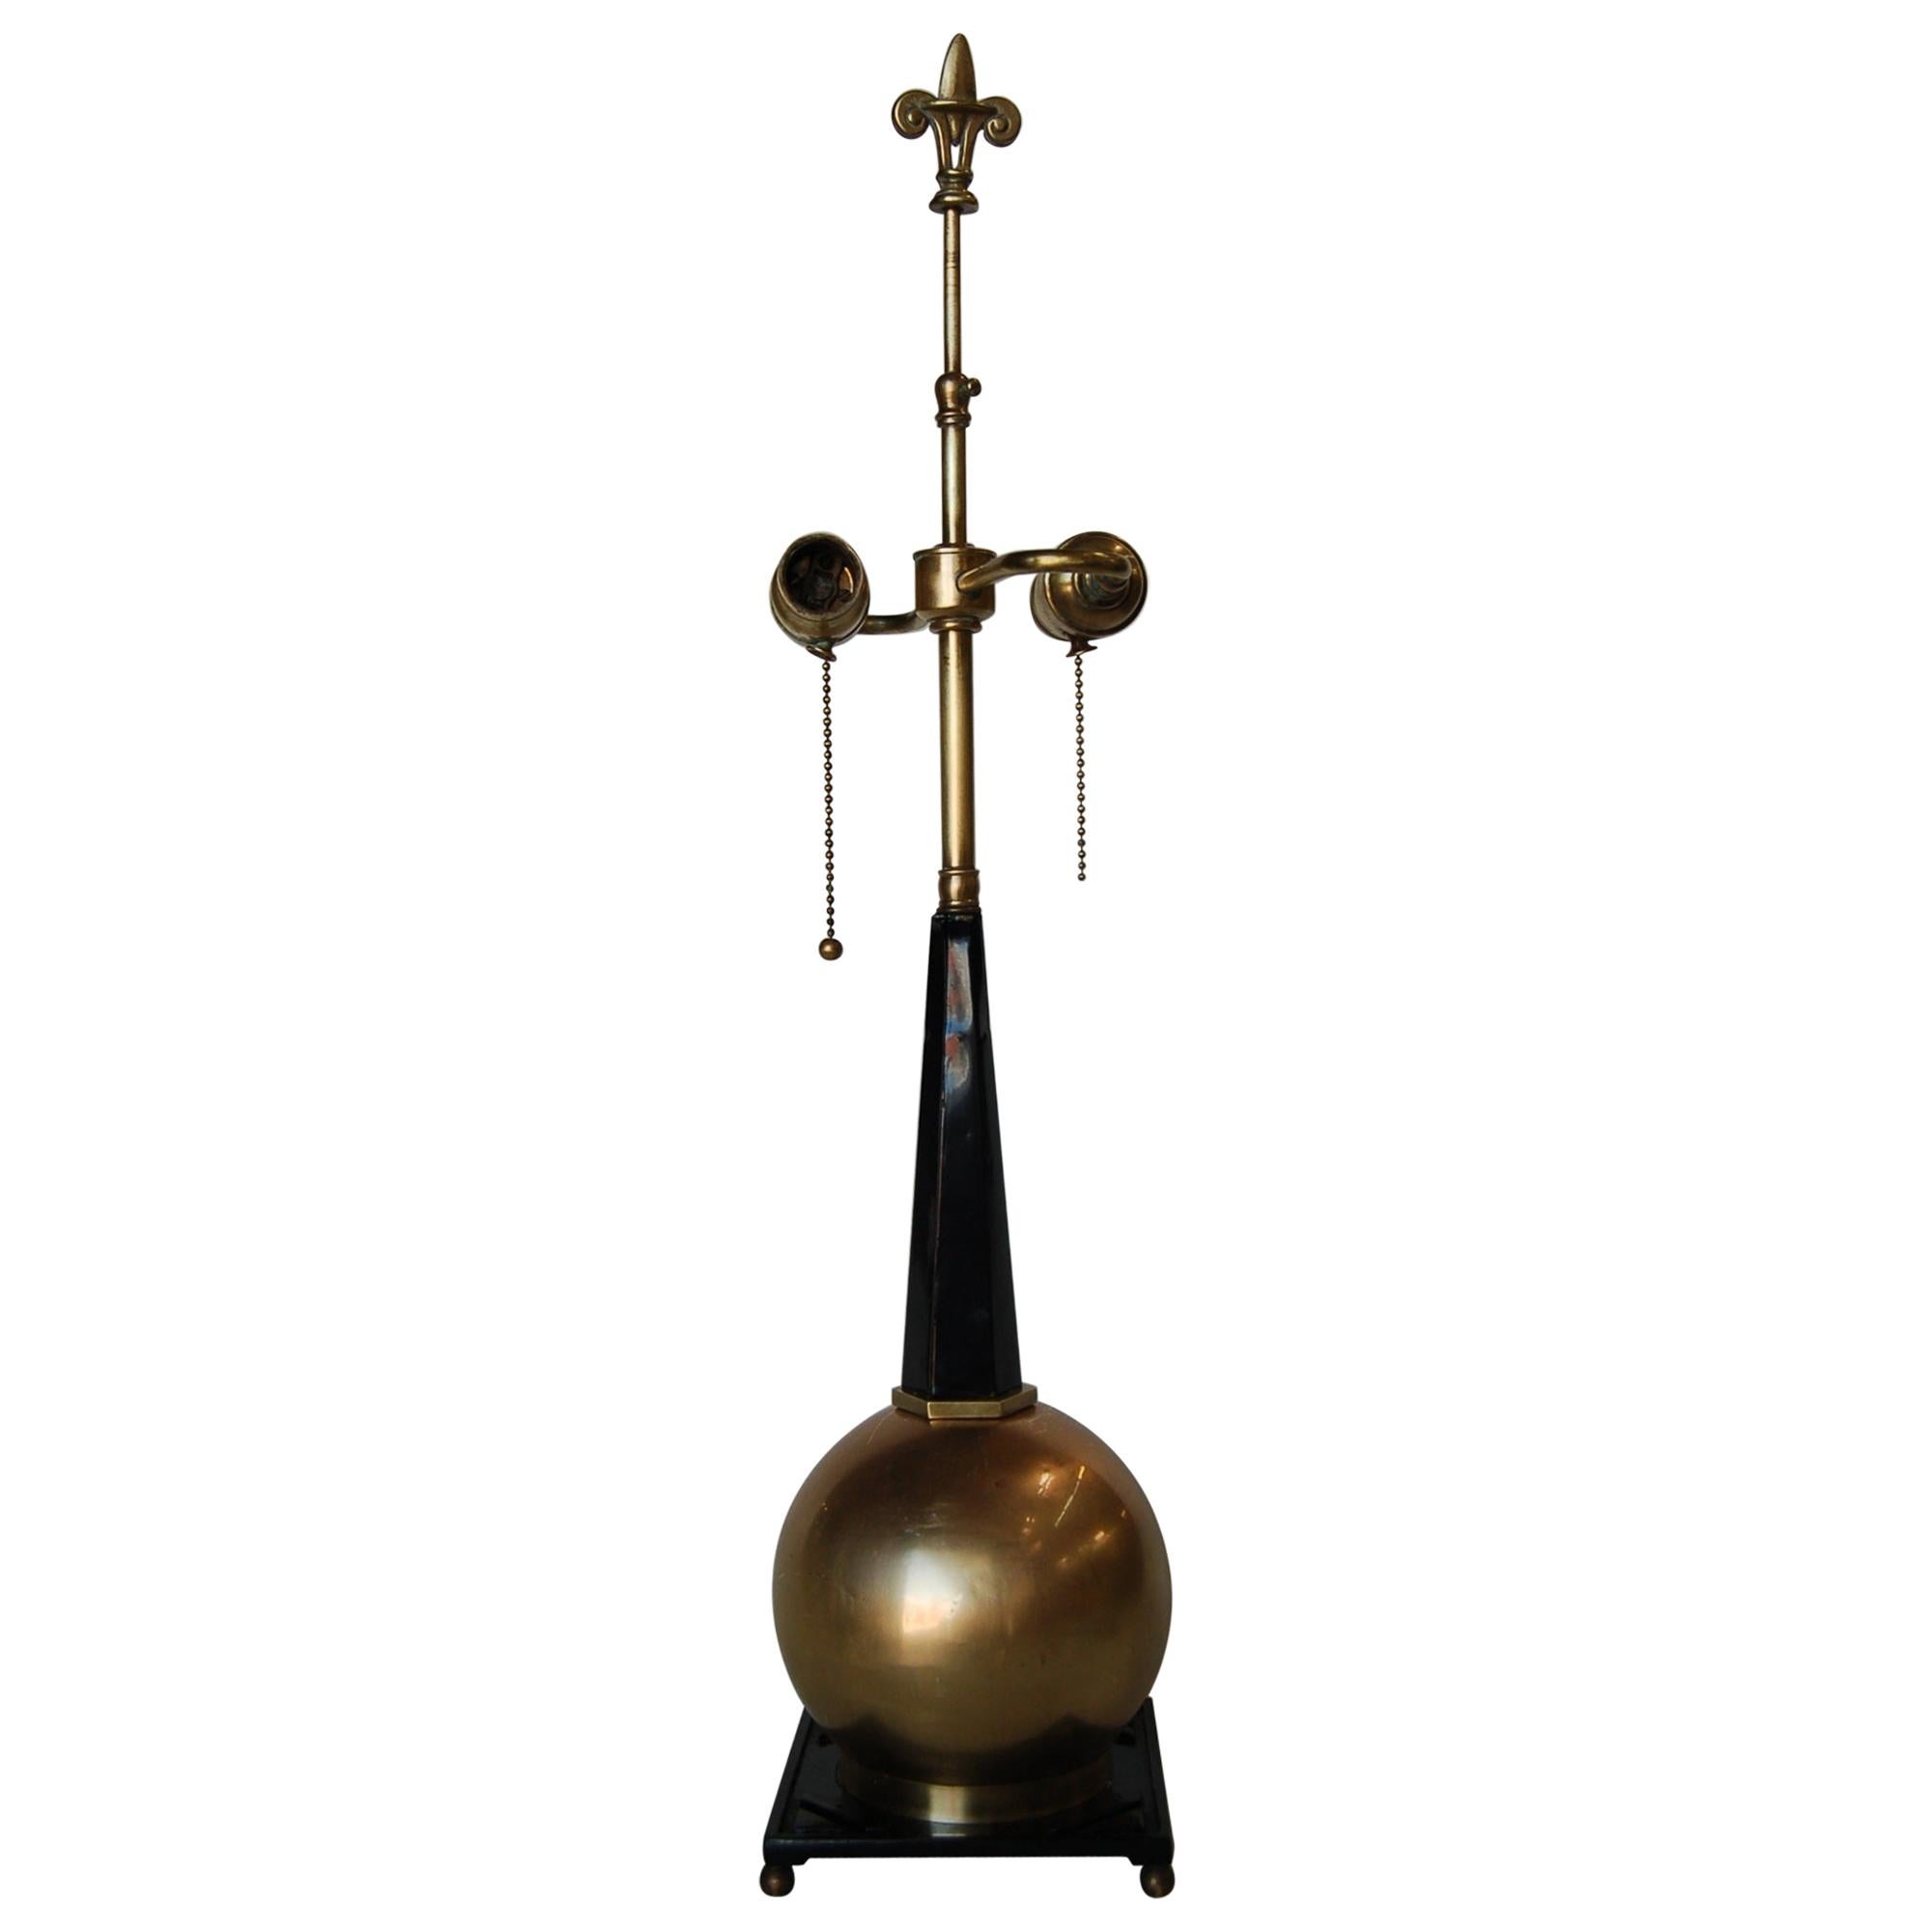 Art Deco Empire Style Brass Ball Table Lamp by Frankart